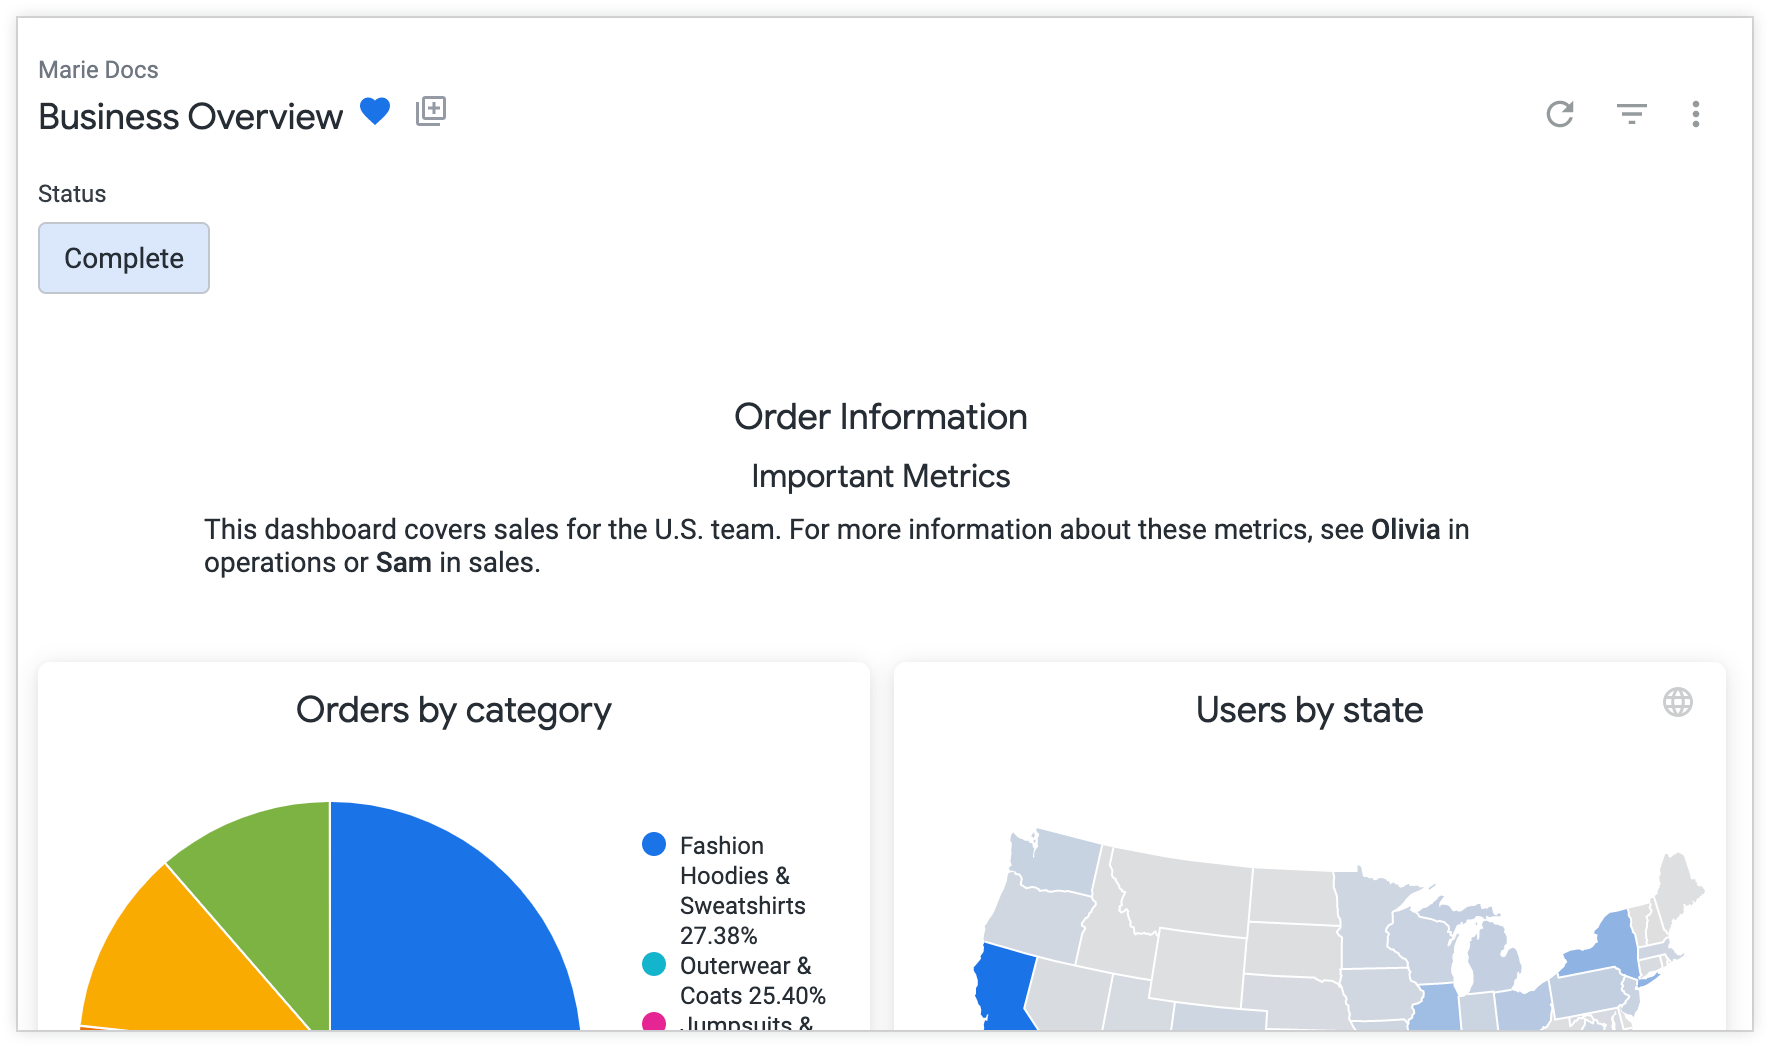 A Business Overview dashboard displays a text tile at the top of the page that provides context and information about the dashboard to users.